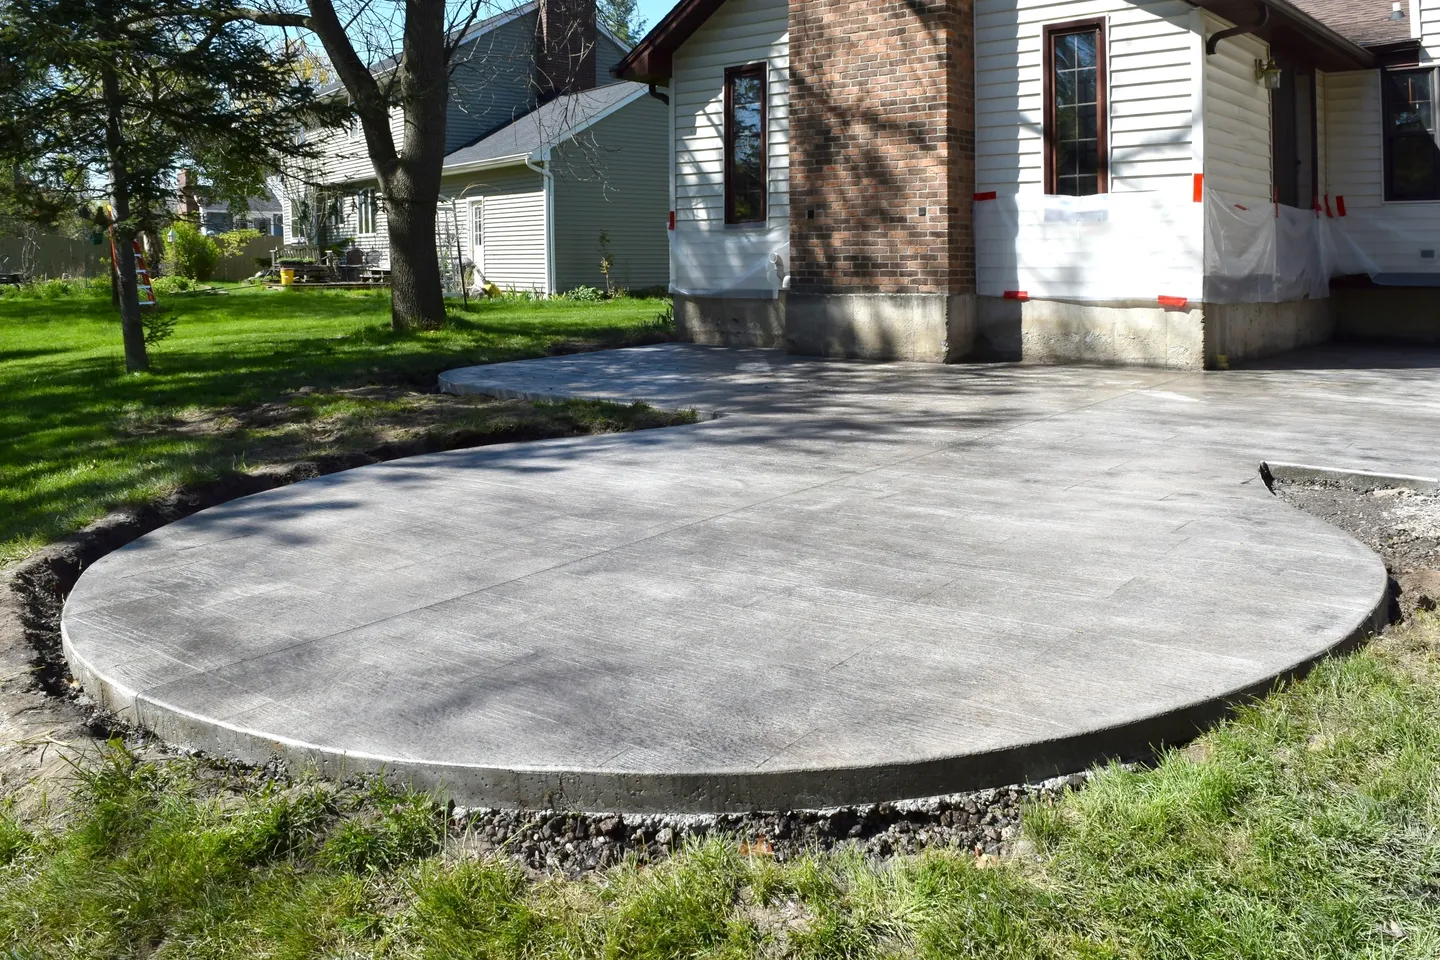 A concrete patio in the middle of a yard.